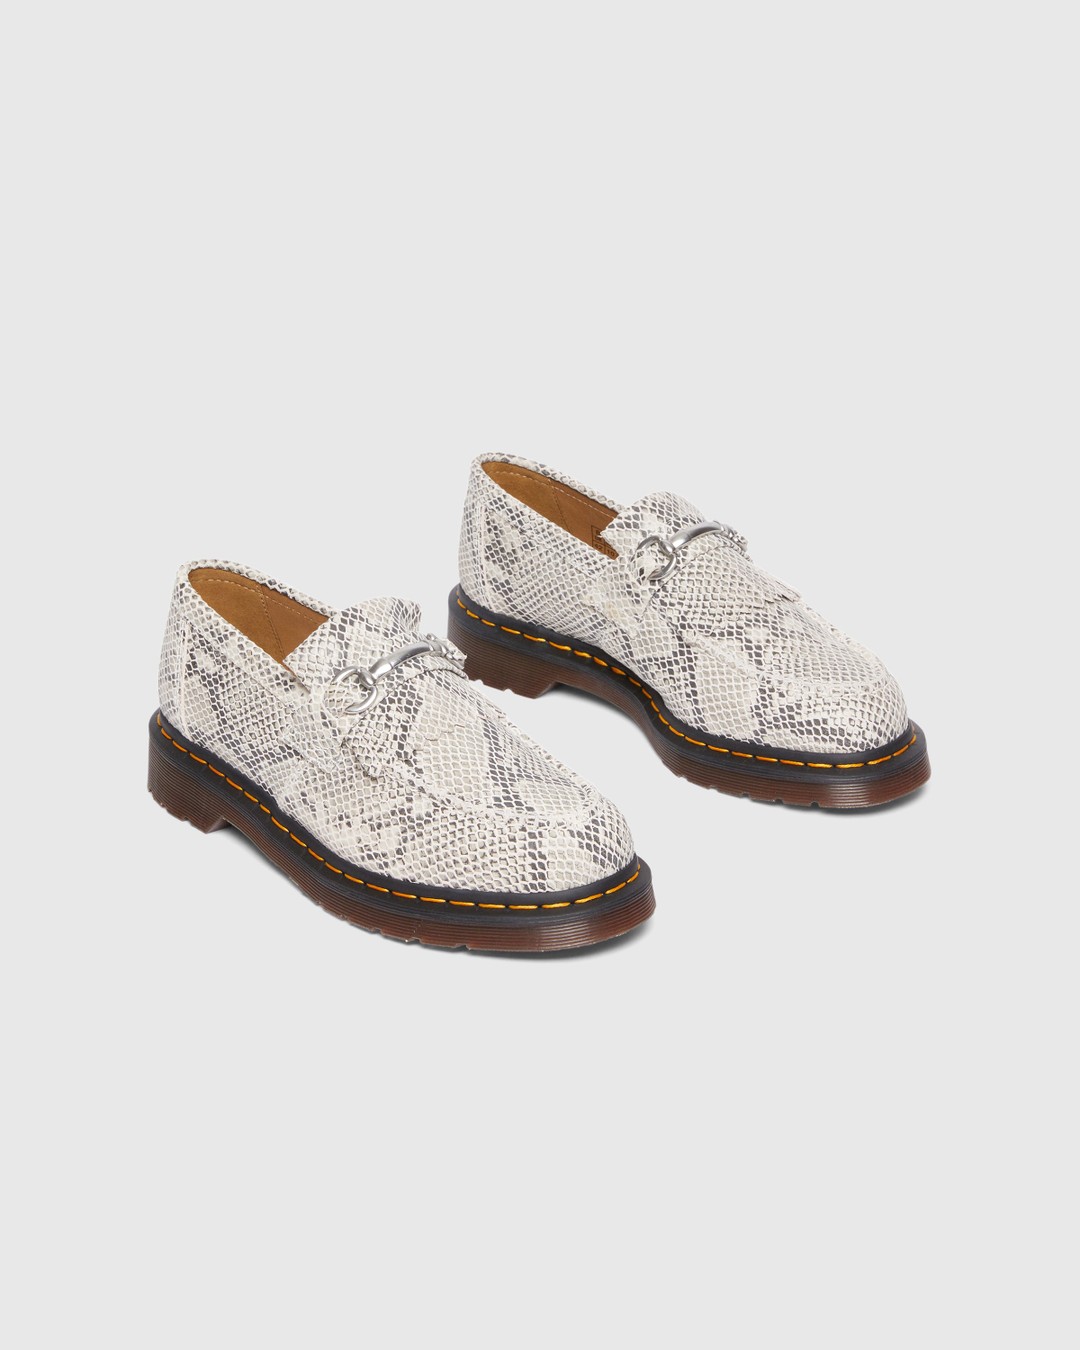 Dr. Martens – Adrian Snaffle Python Print Suede Loafers Sand/Black - Shoes - Grey - Image 2